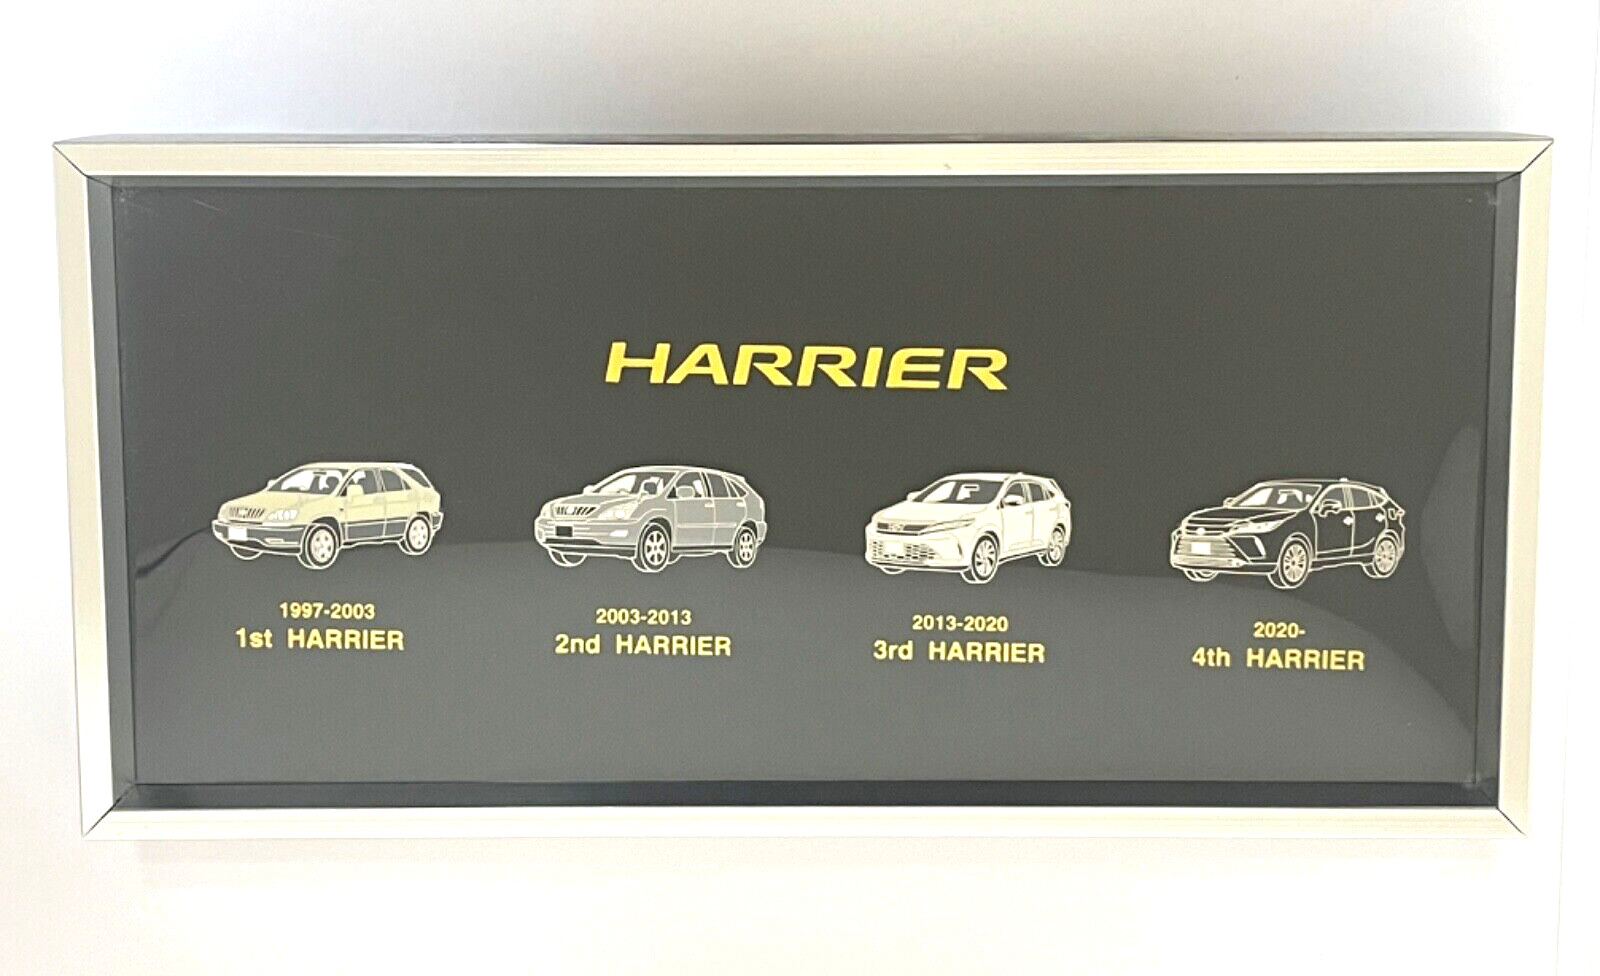 Toyota harrier(Venza) limited ornament/Pins from Japan(Not sold in stores)